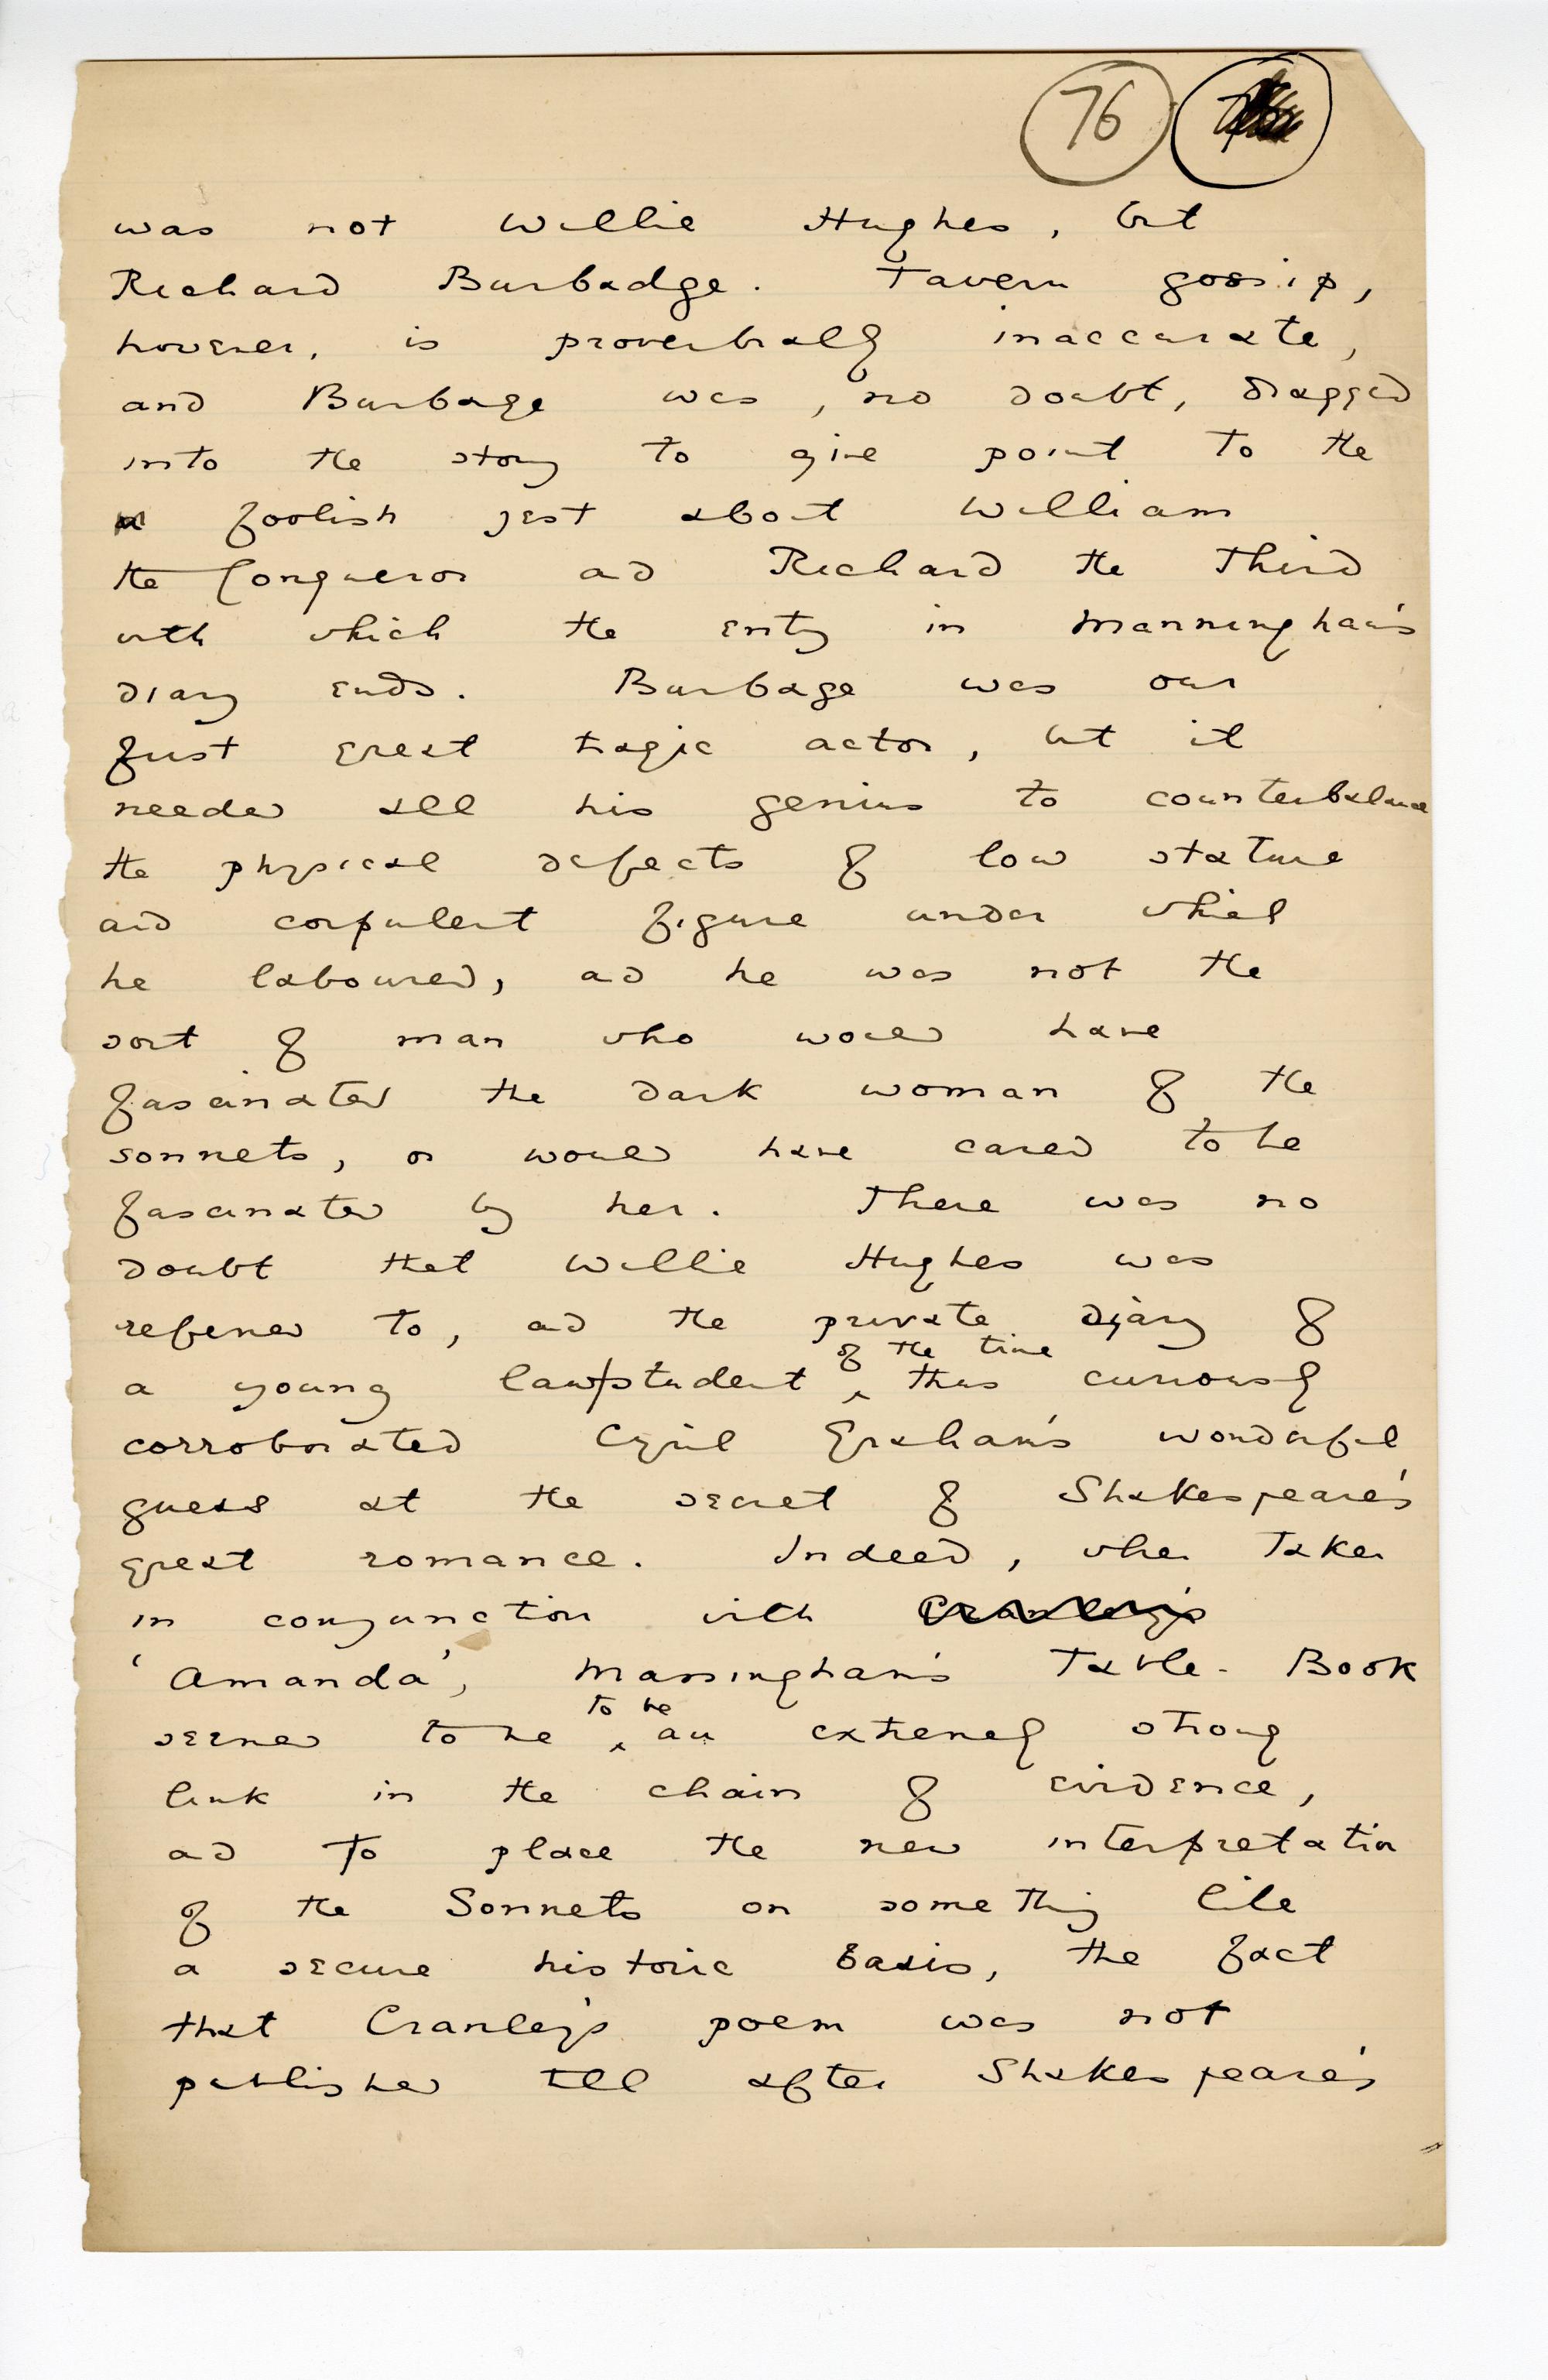 Folio 76 is a handwritten notebook page with no cutouts. In the top righthand corner the folio number 76 seems to be corrected in Wilde's hand from "75."